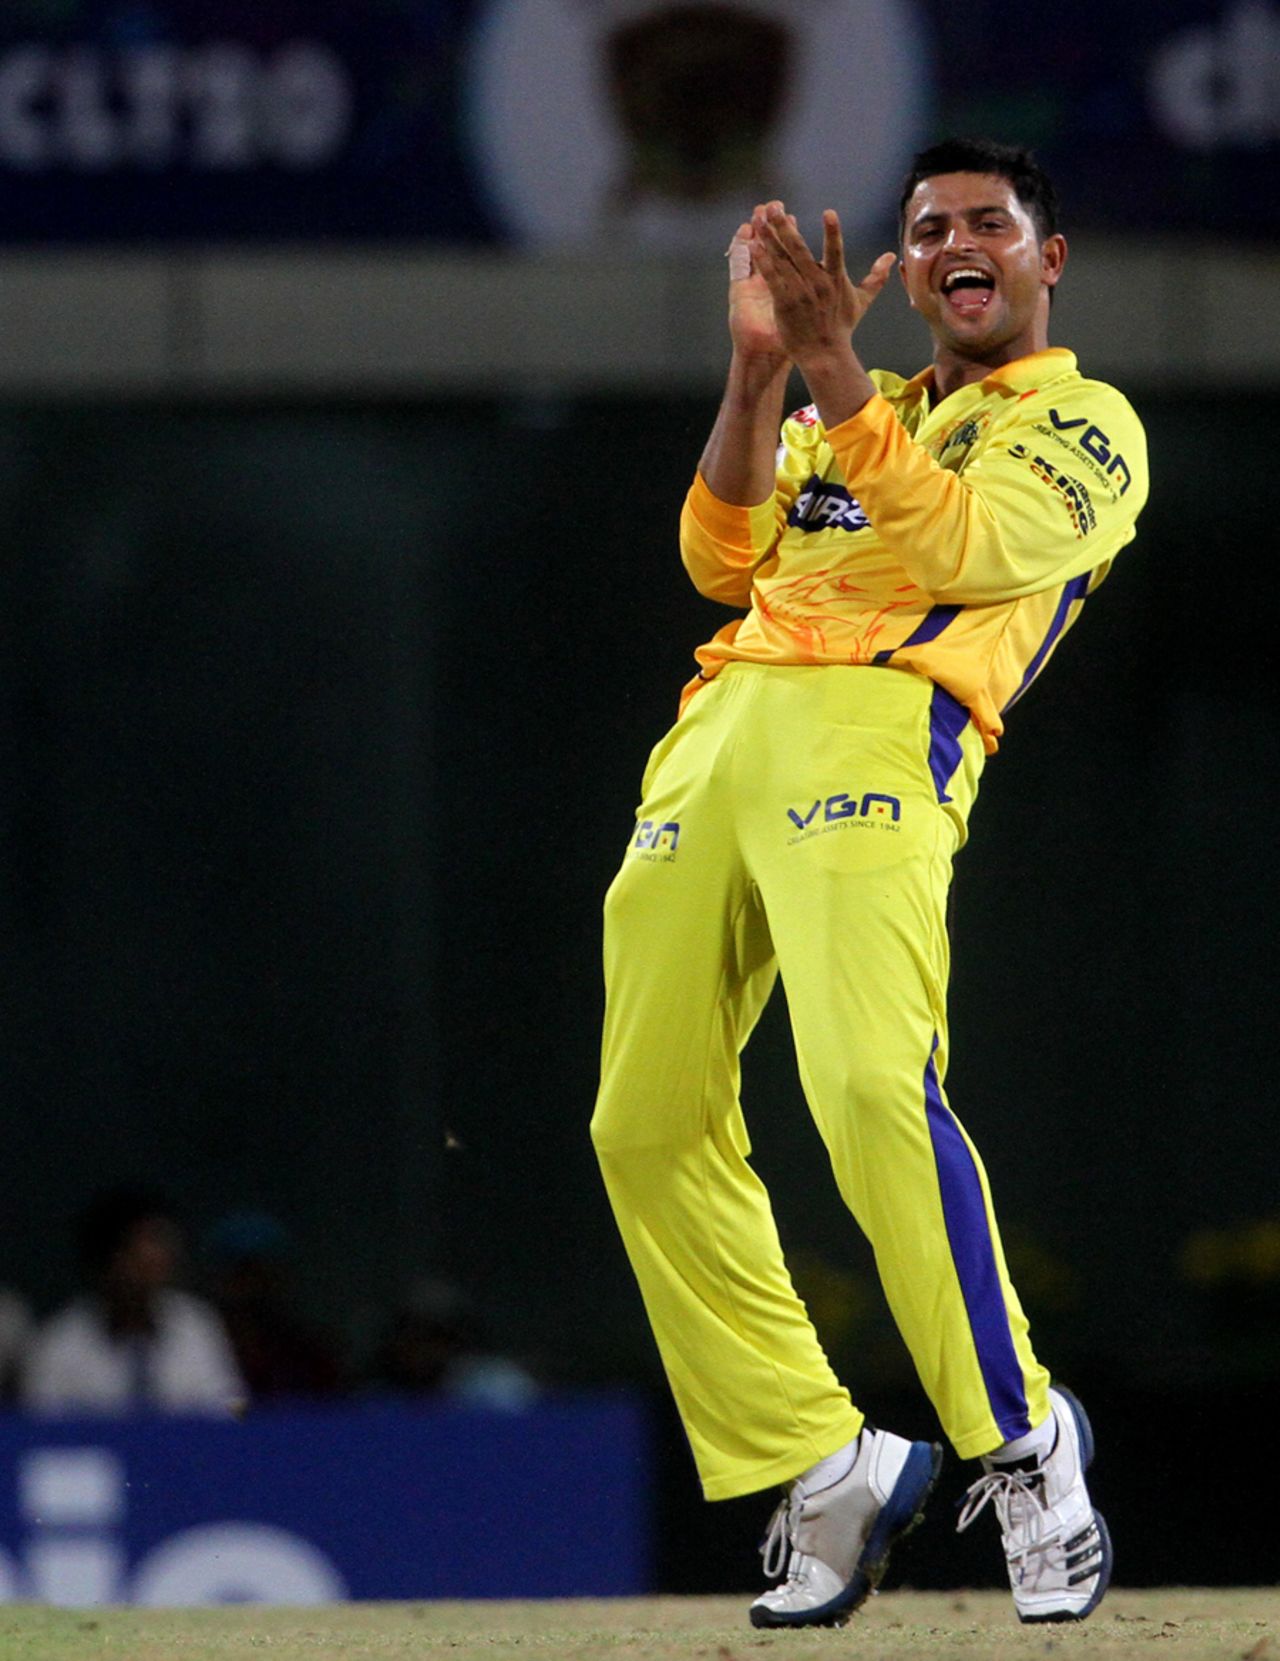 Suresh Raina is ecstatic after bowling JP Duminy for a duck, Chennai Super Kings v Sunrisers Hyderabad, Group B, Champions League 2013, Ranchi, September 26, 2013